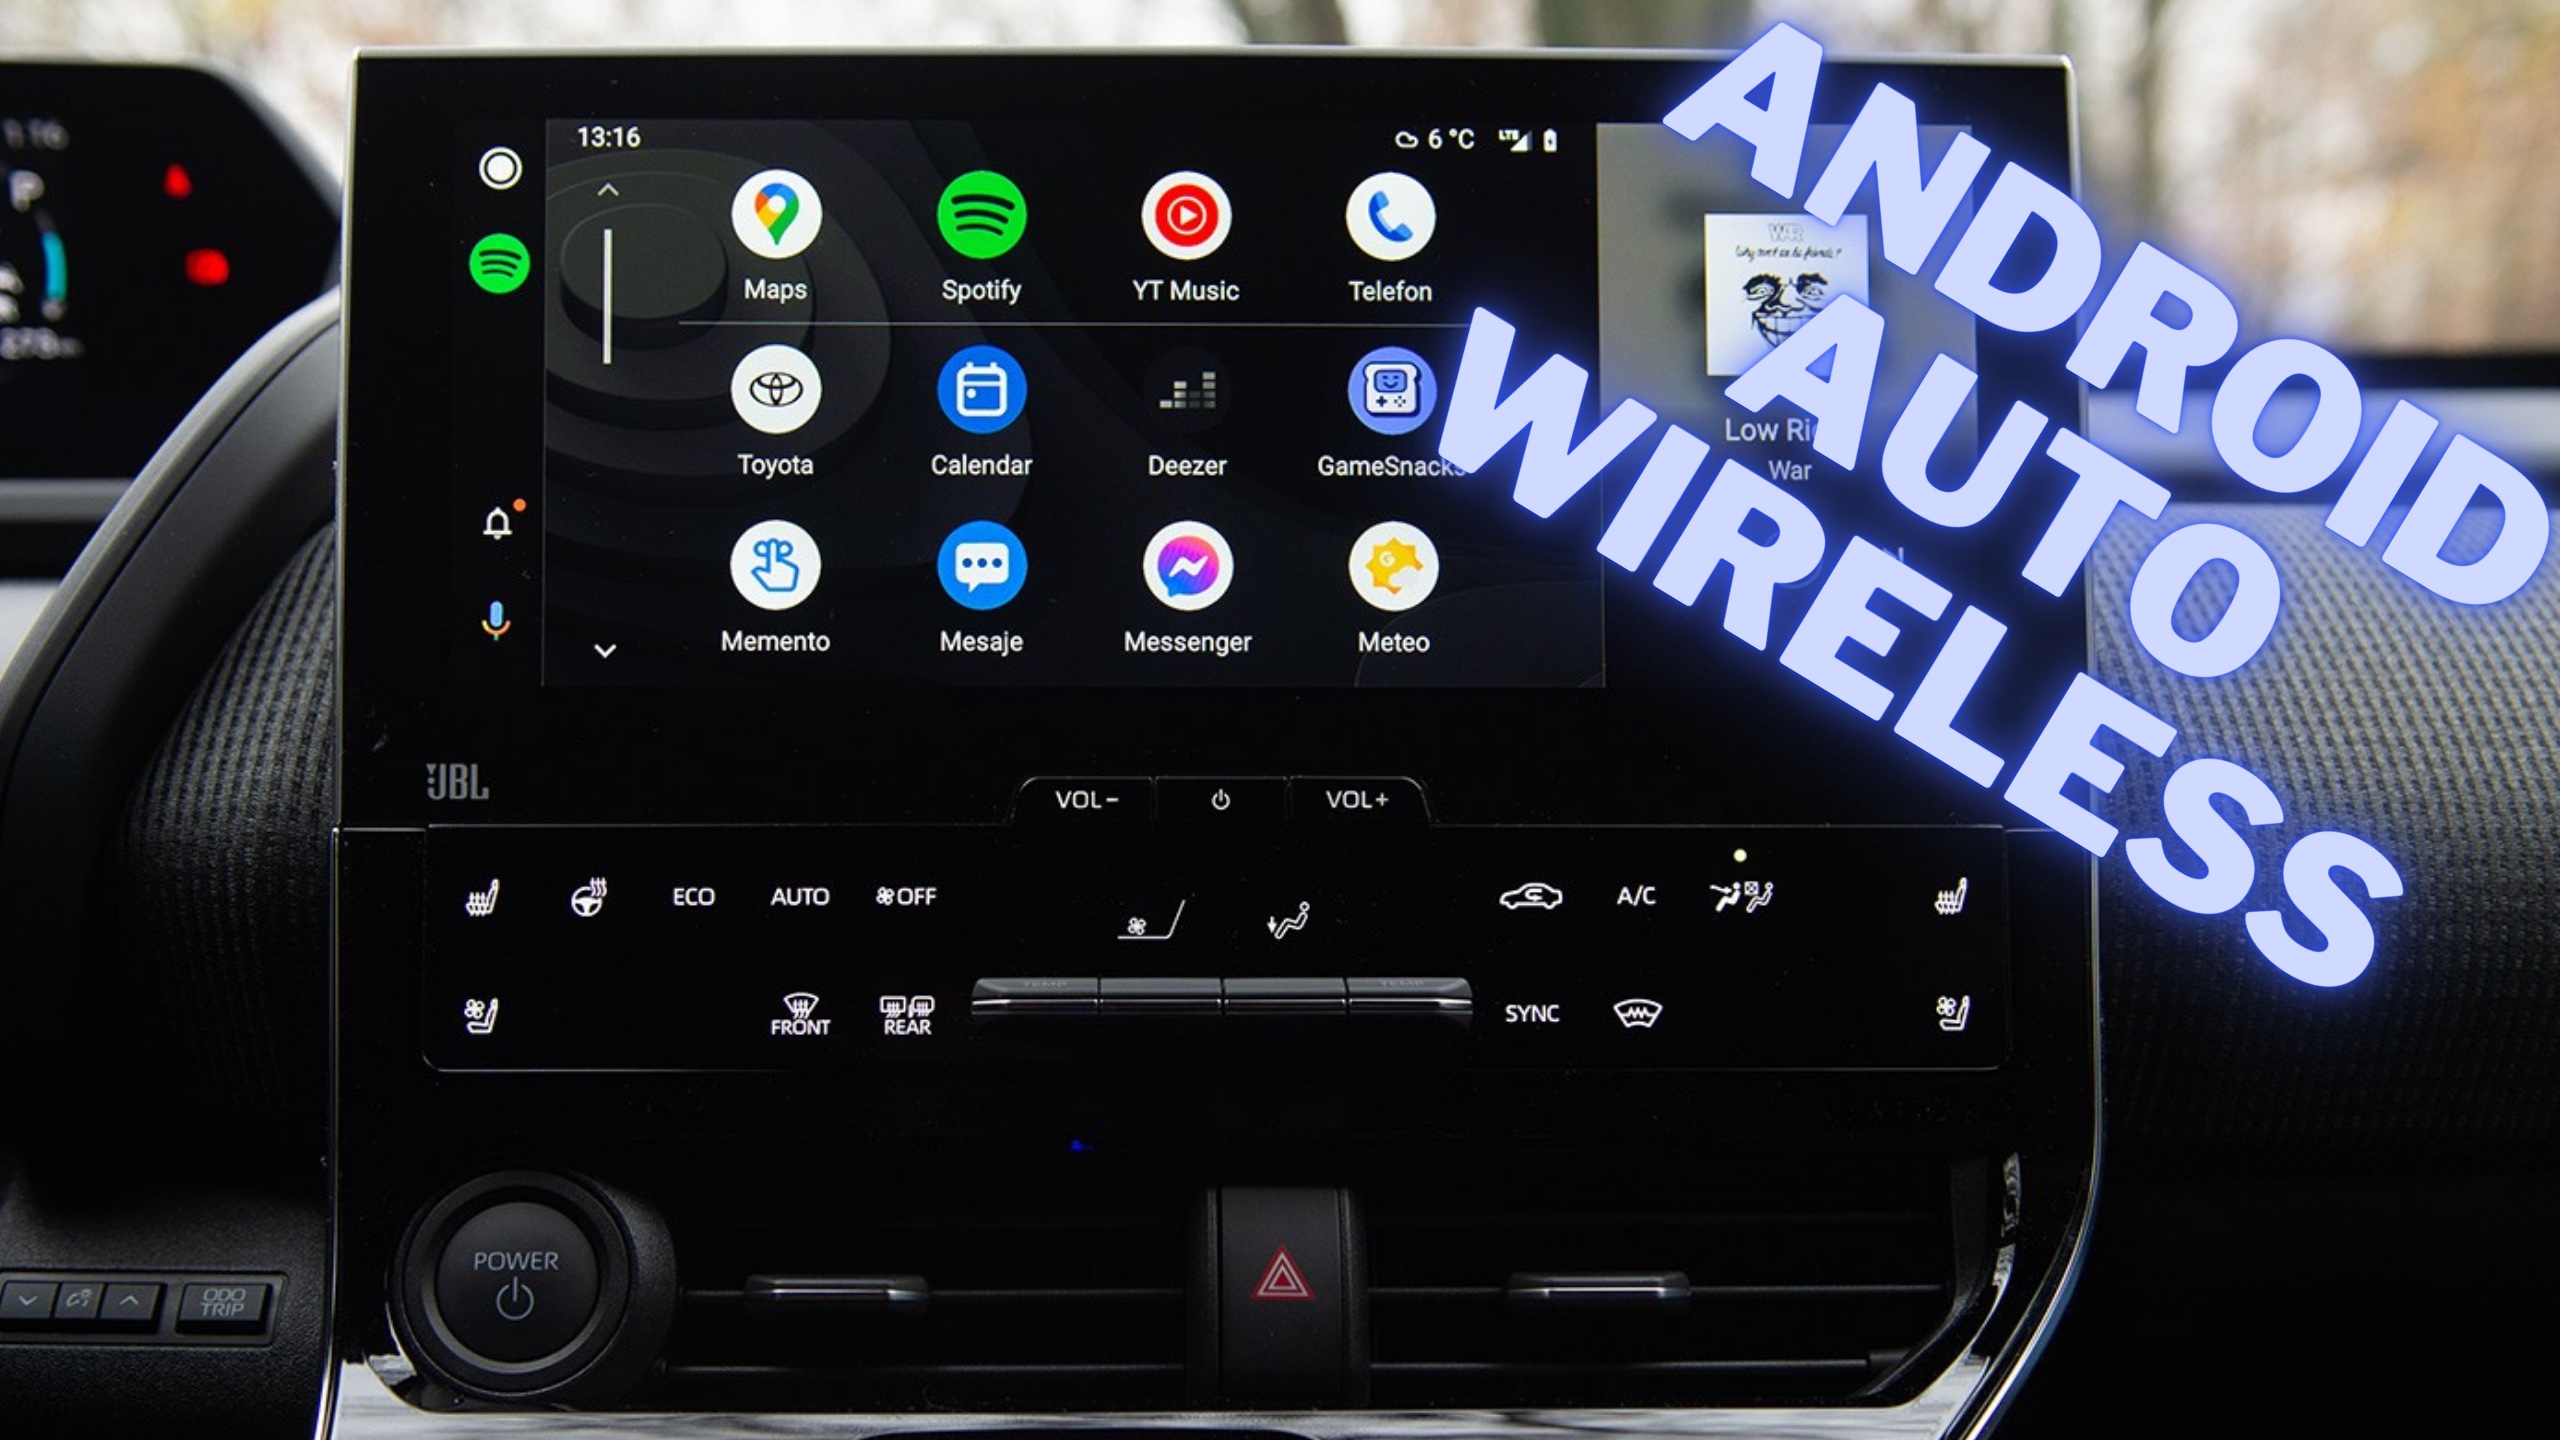 Apple CarPlay and Android Auto: What Are They and How Do They Work?